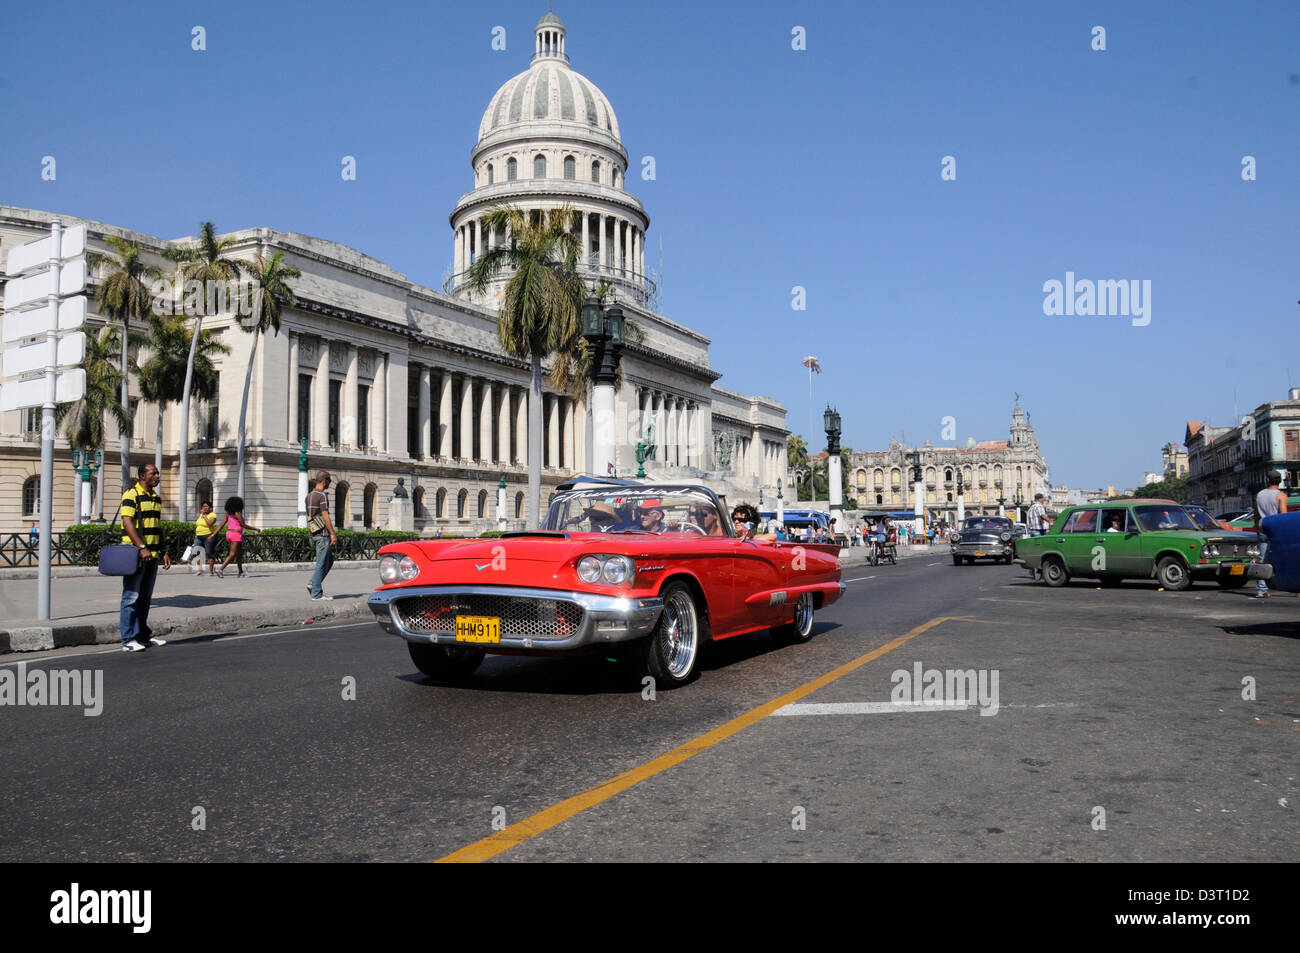 Old american car in front of Capitolio, Old town Havana Stock Photo